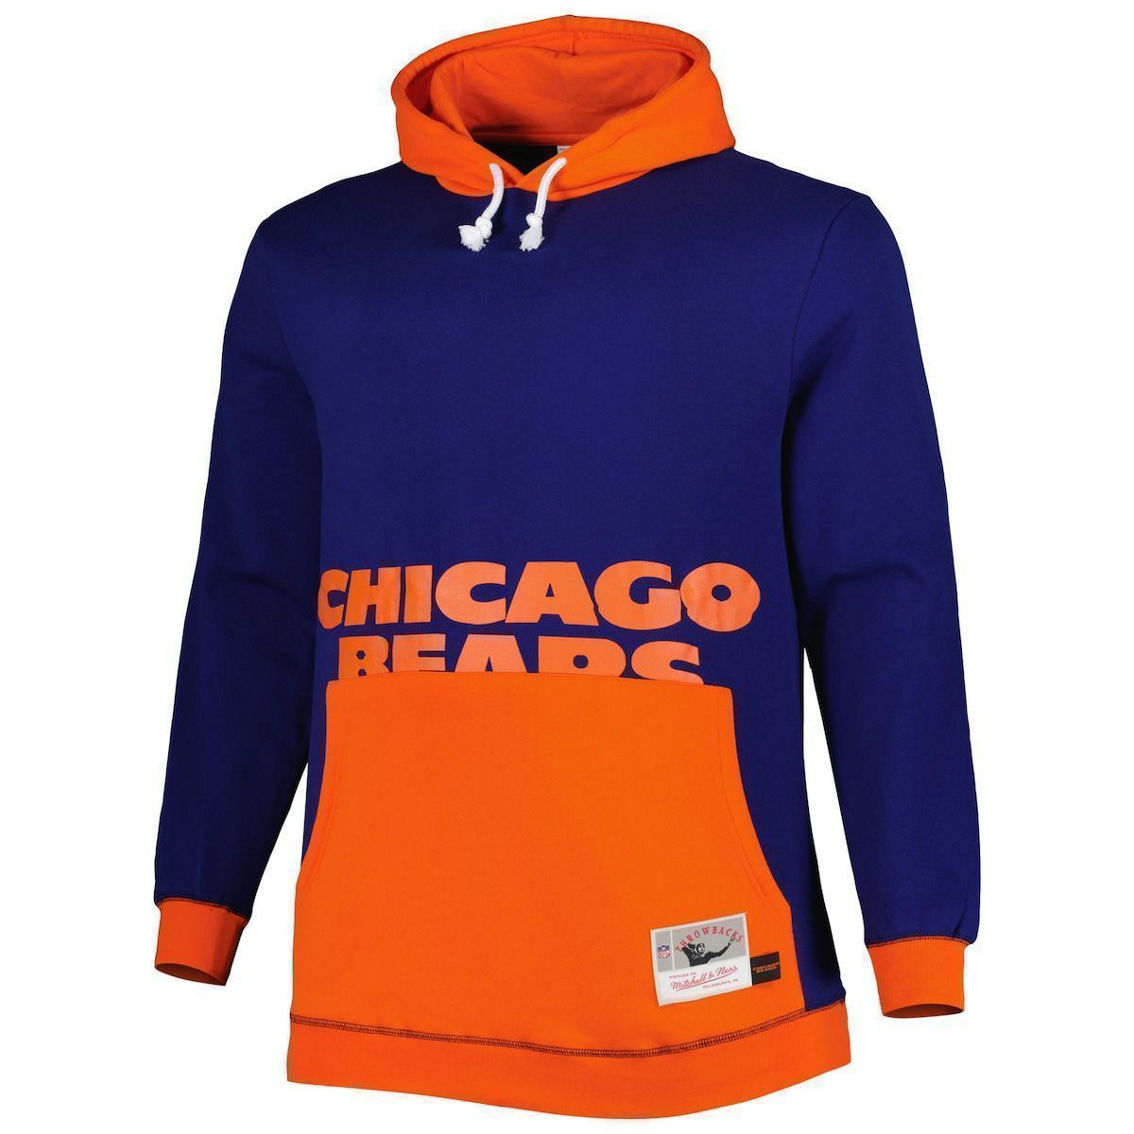 Mitchell & Ness Men's Navy/Orange Chicago Bears Big & Tall Big Face Pullover Hoodie - Image 3 of 4